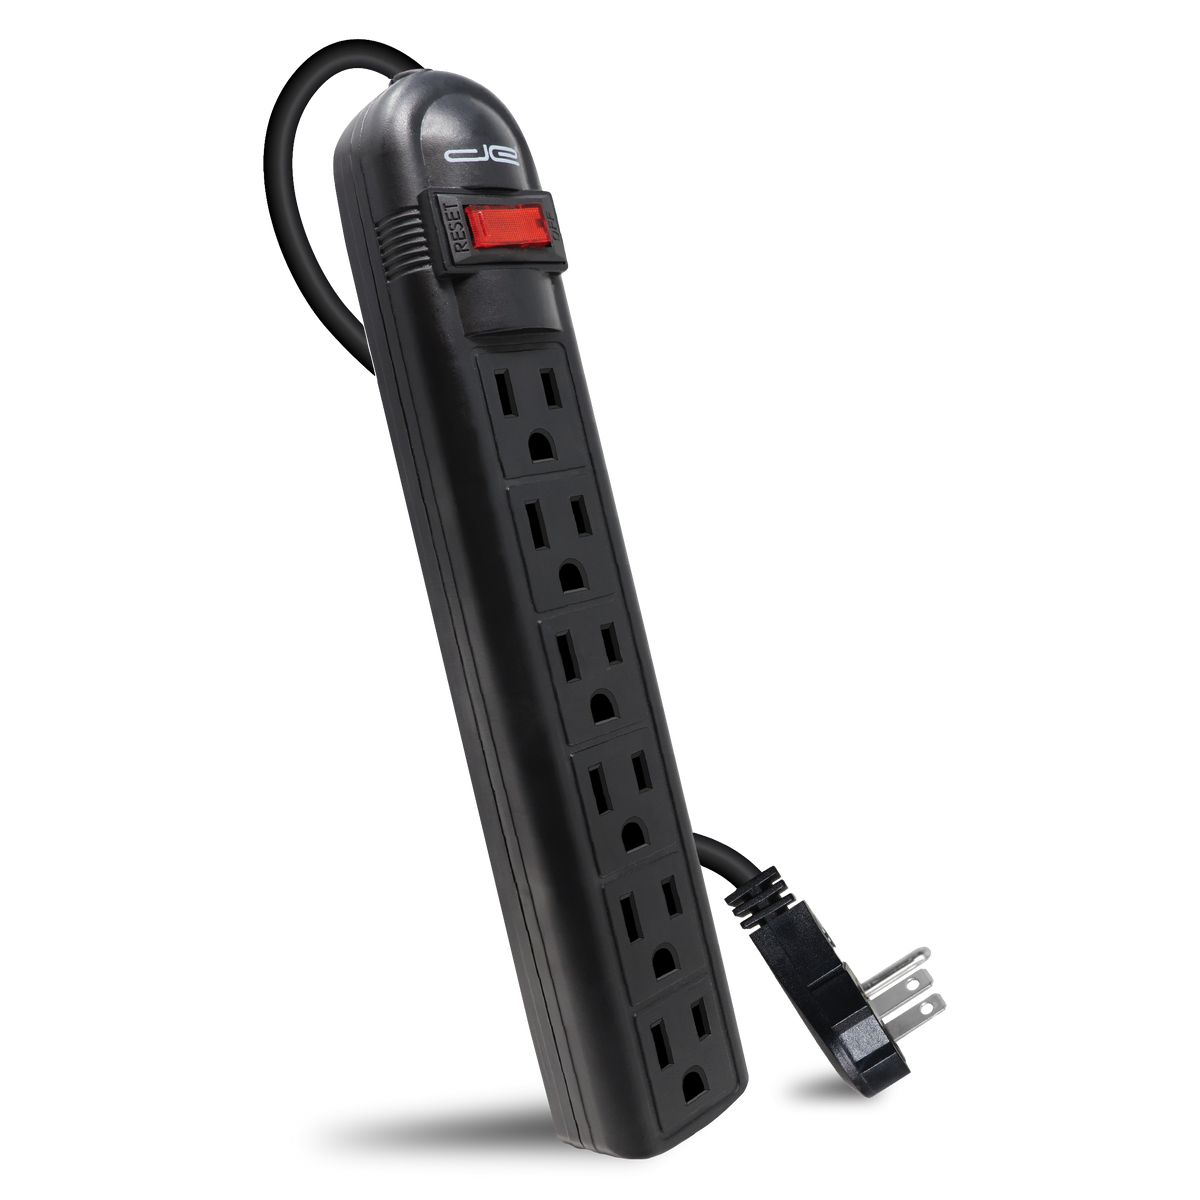 6-Outlet Power Strip Surge Protector with 3 ft. Cord YLPT-91 - The